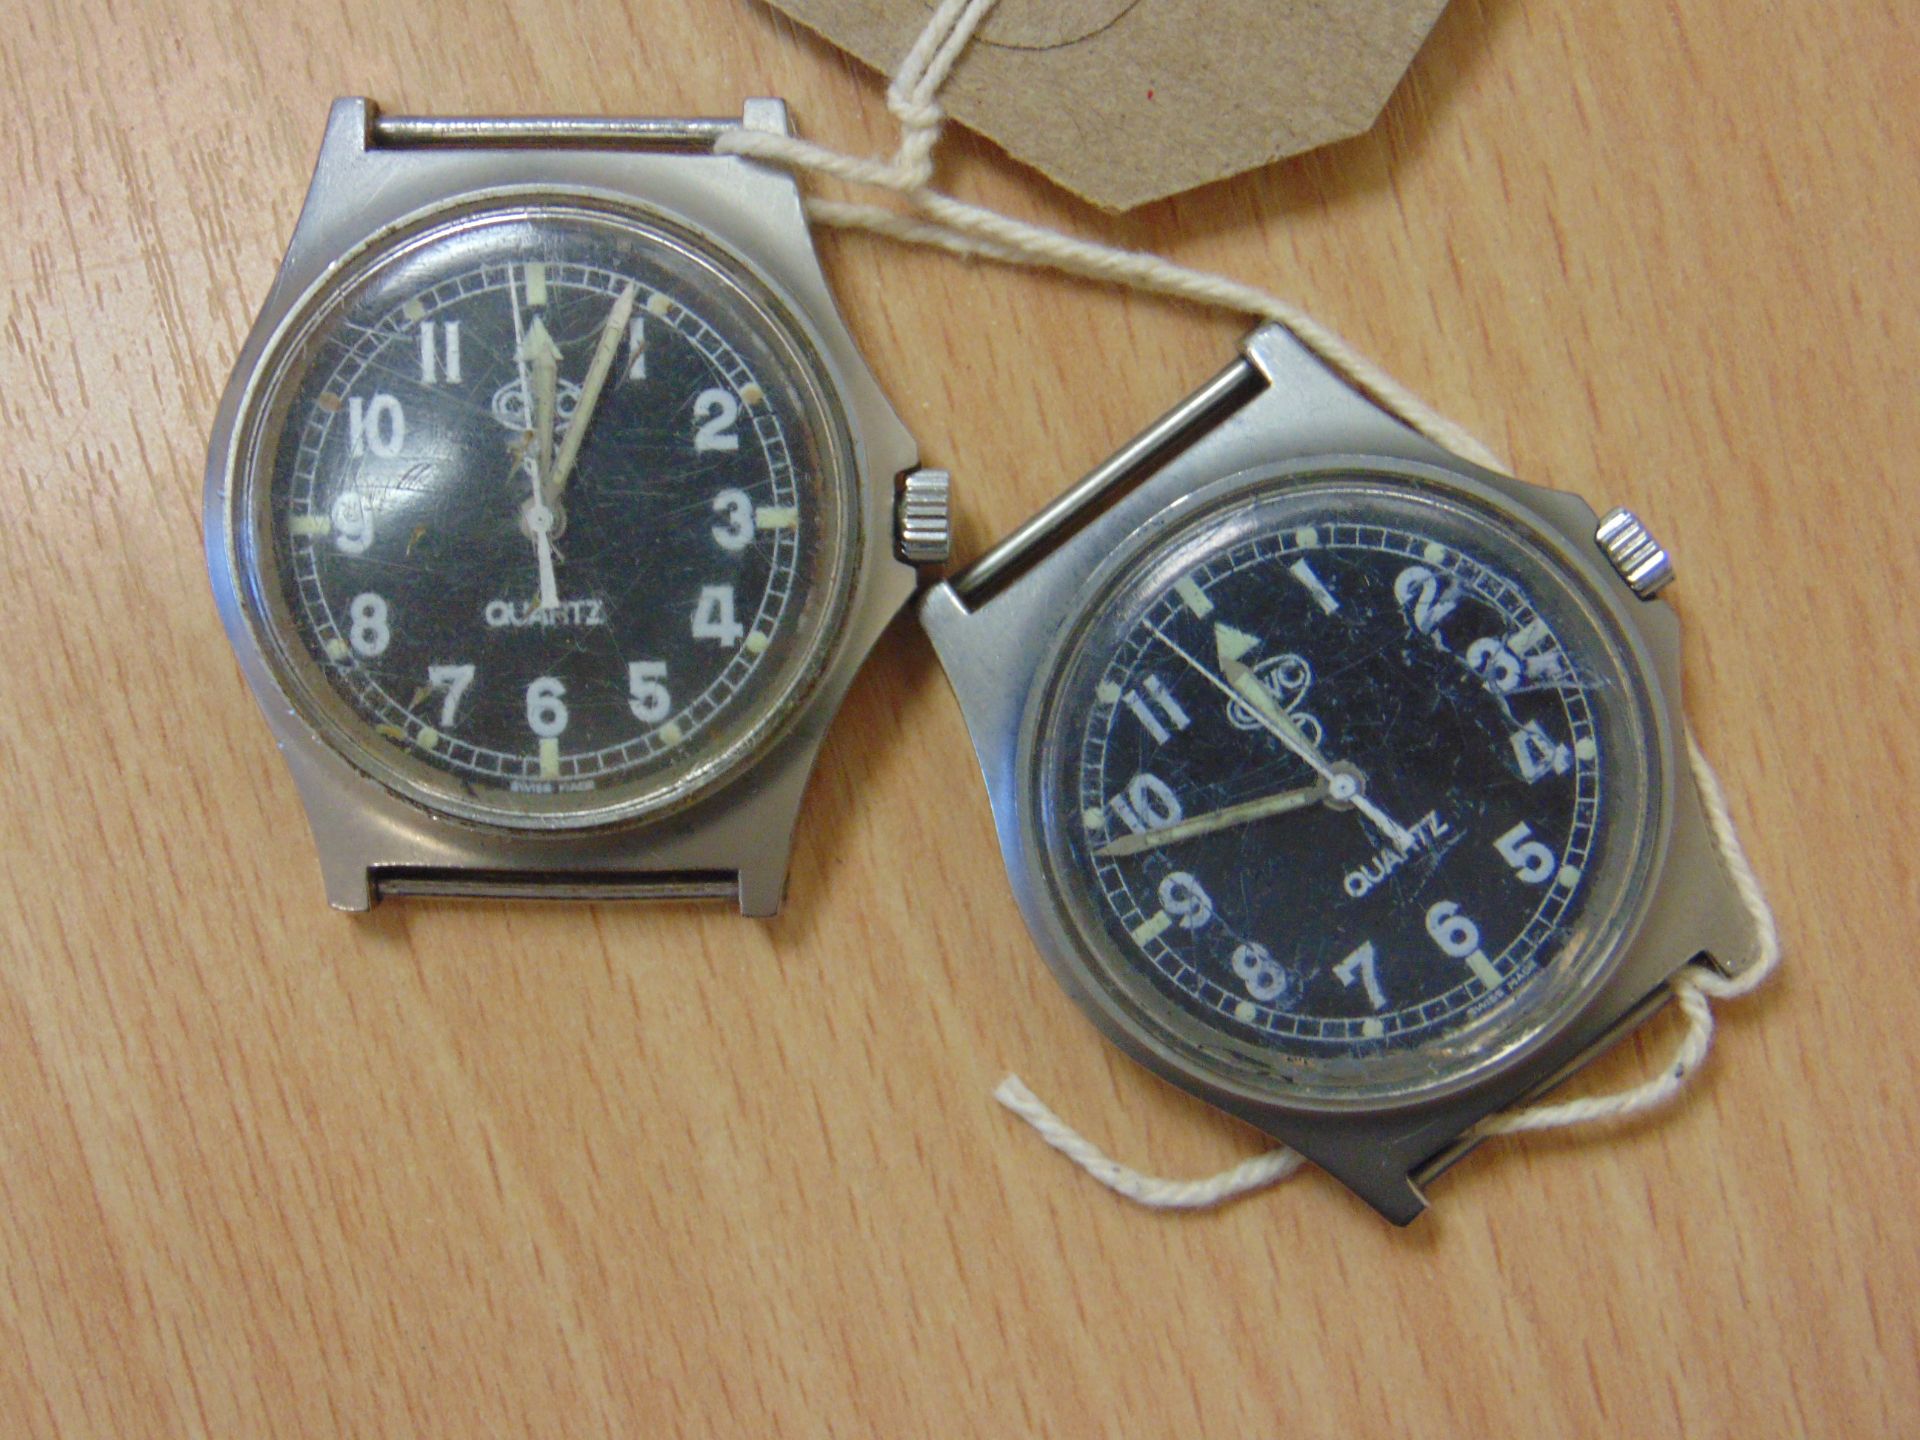 2X CWC SERVICE WATCHES 1X 0552 RN/MARINES 1X W10 DATE 1990/1998 - Image 2 of 8